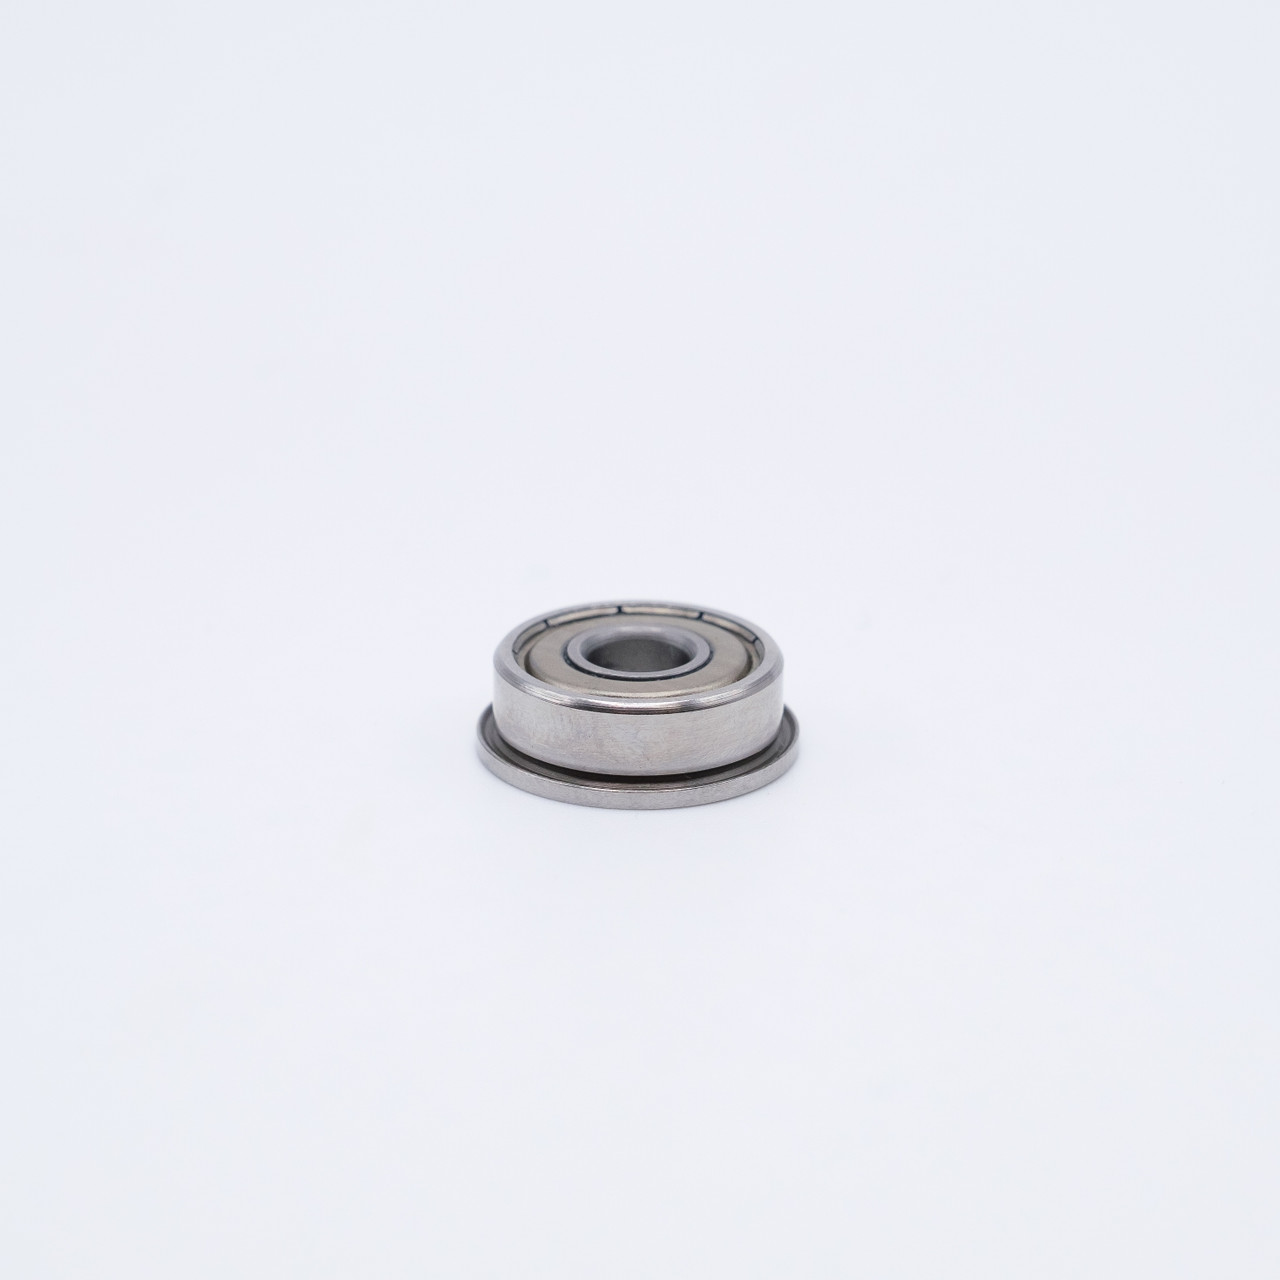 SF686-ZZ Stainless Steel Mini Flange Ball Bearing 6x13x5mm Top View